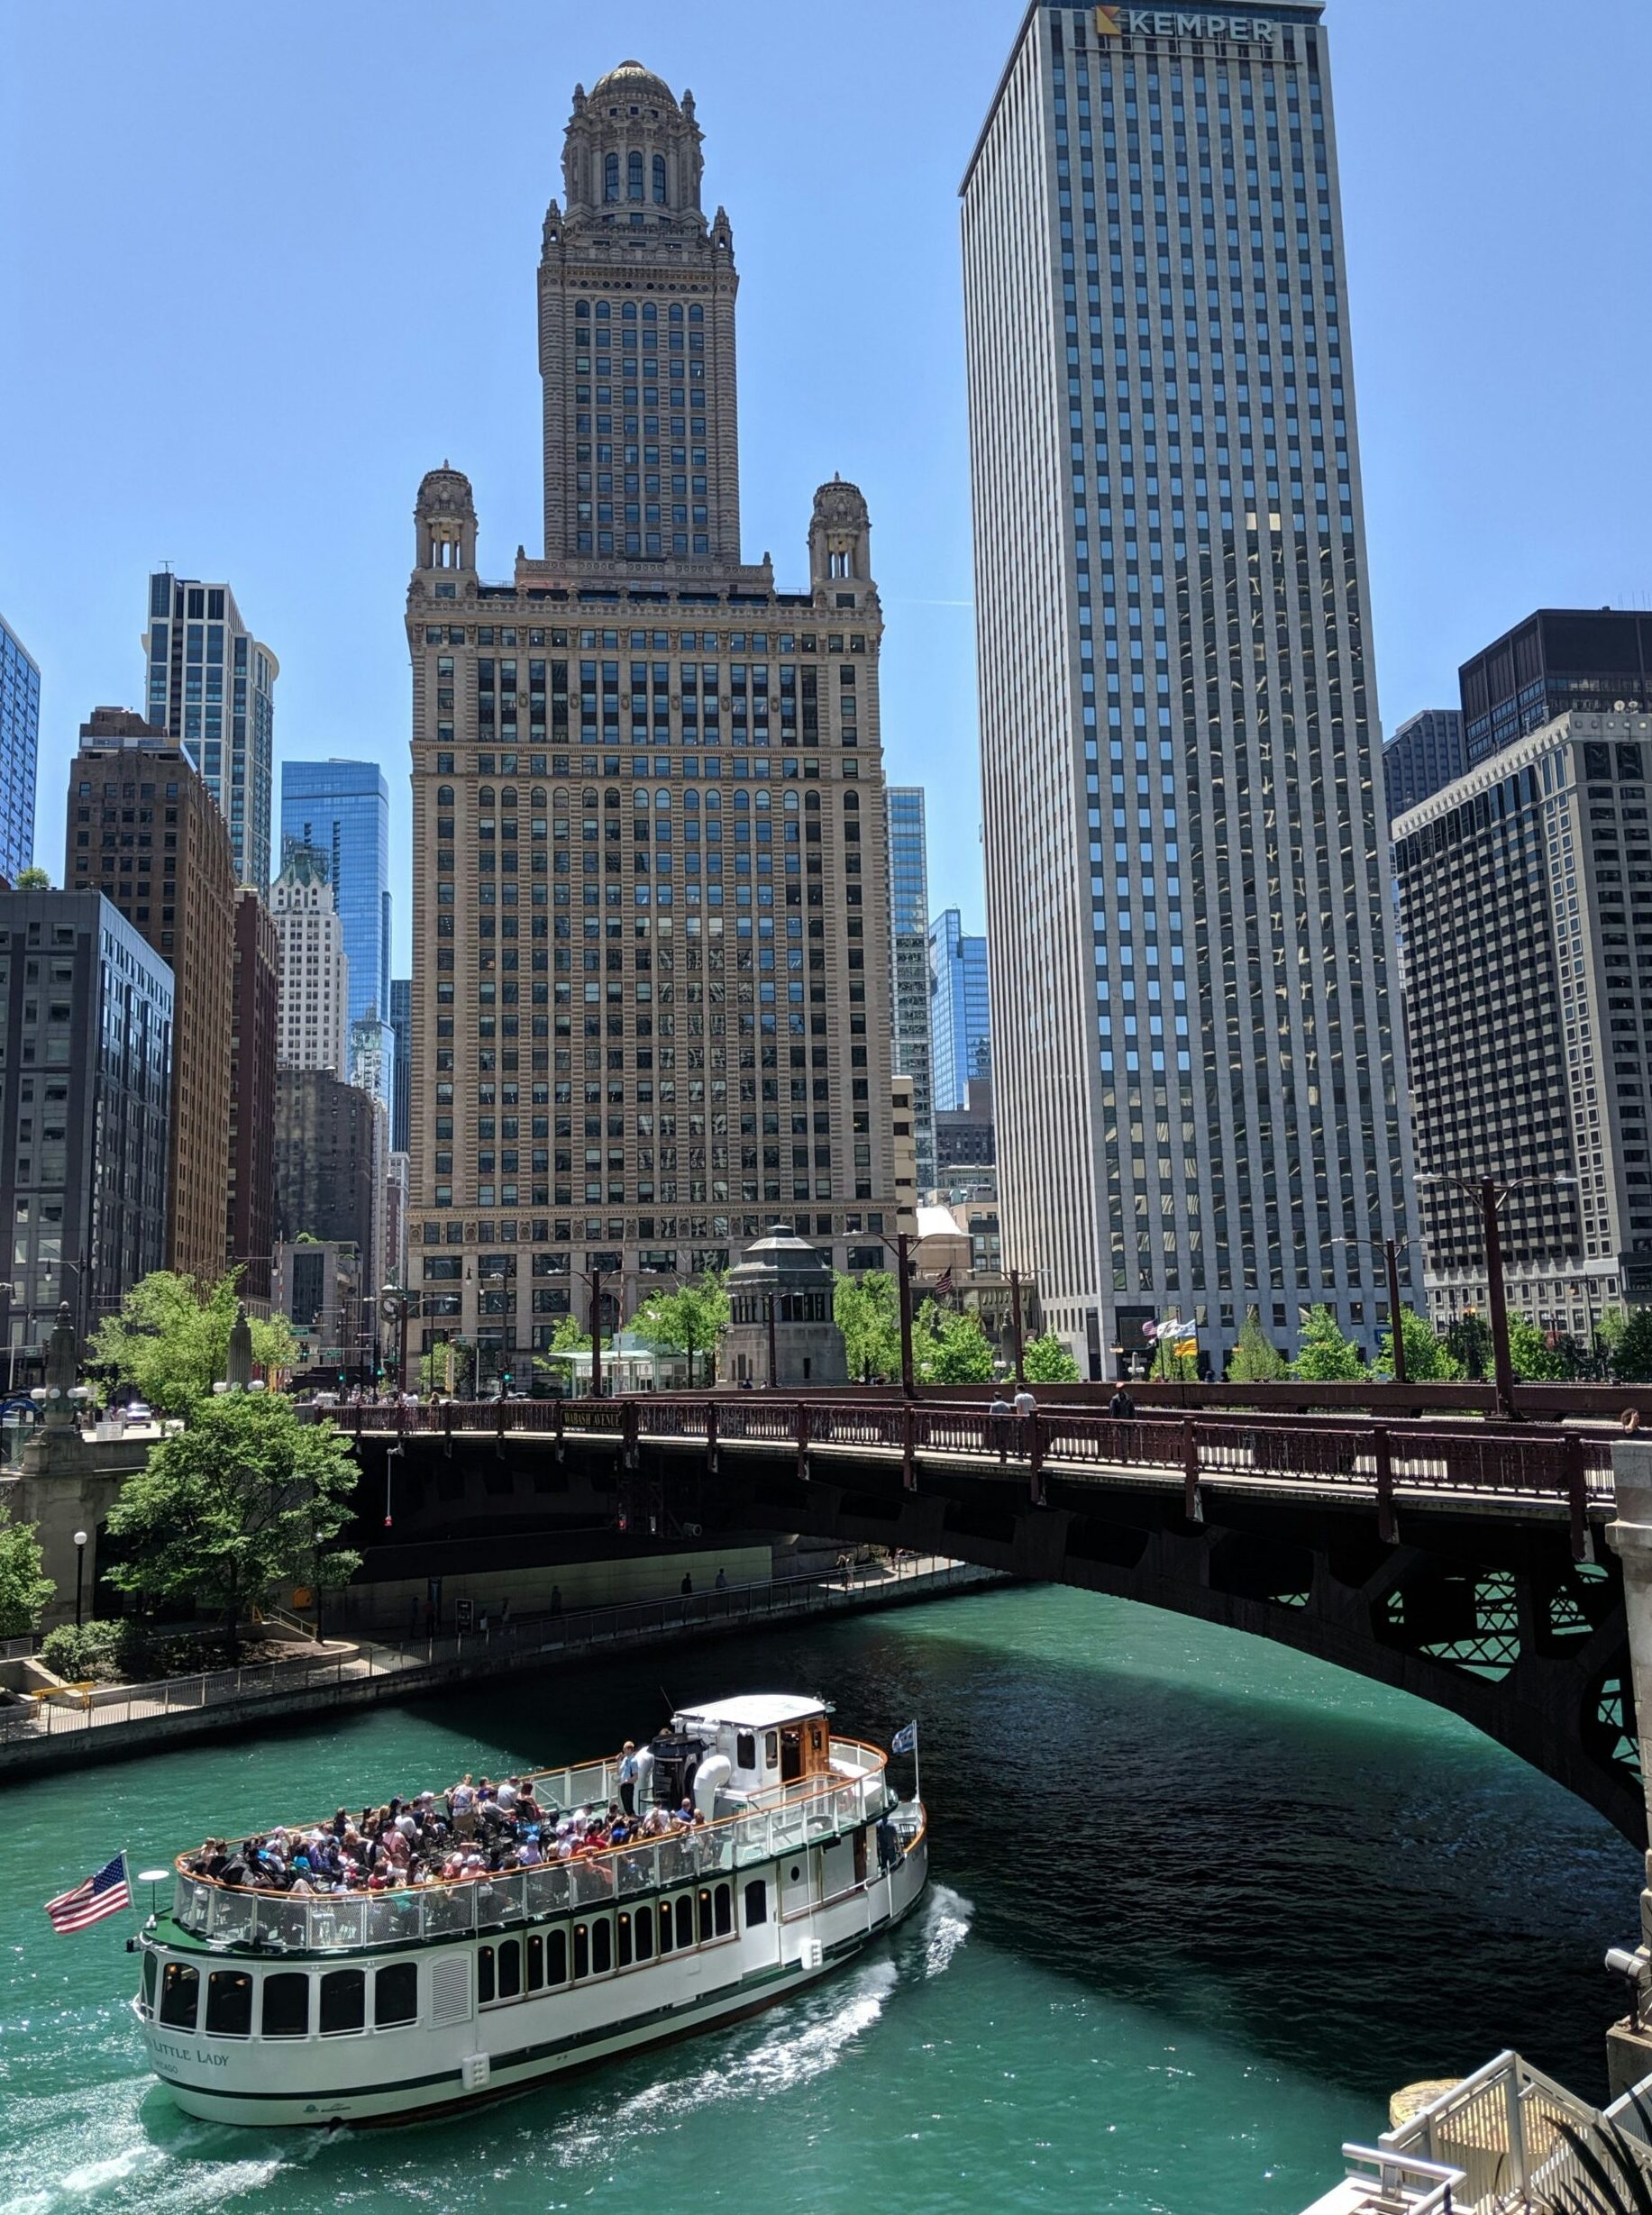 The Chicago River with a walkway running above it.